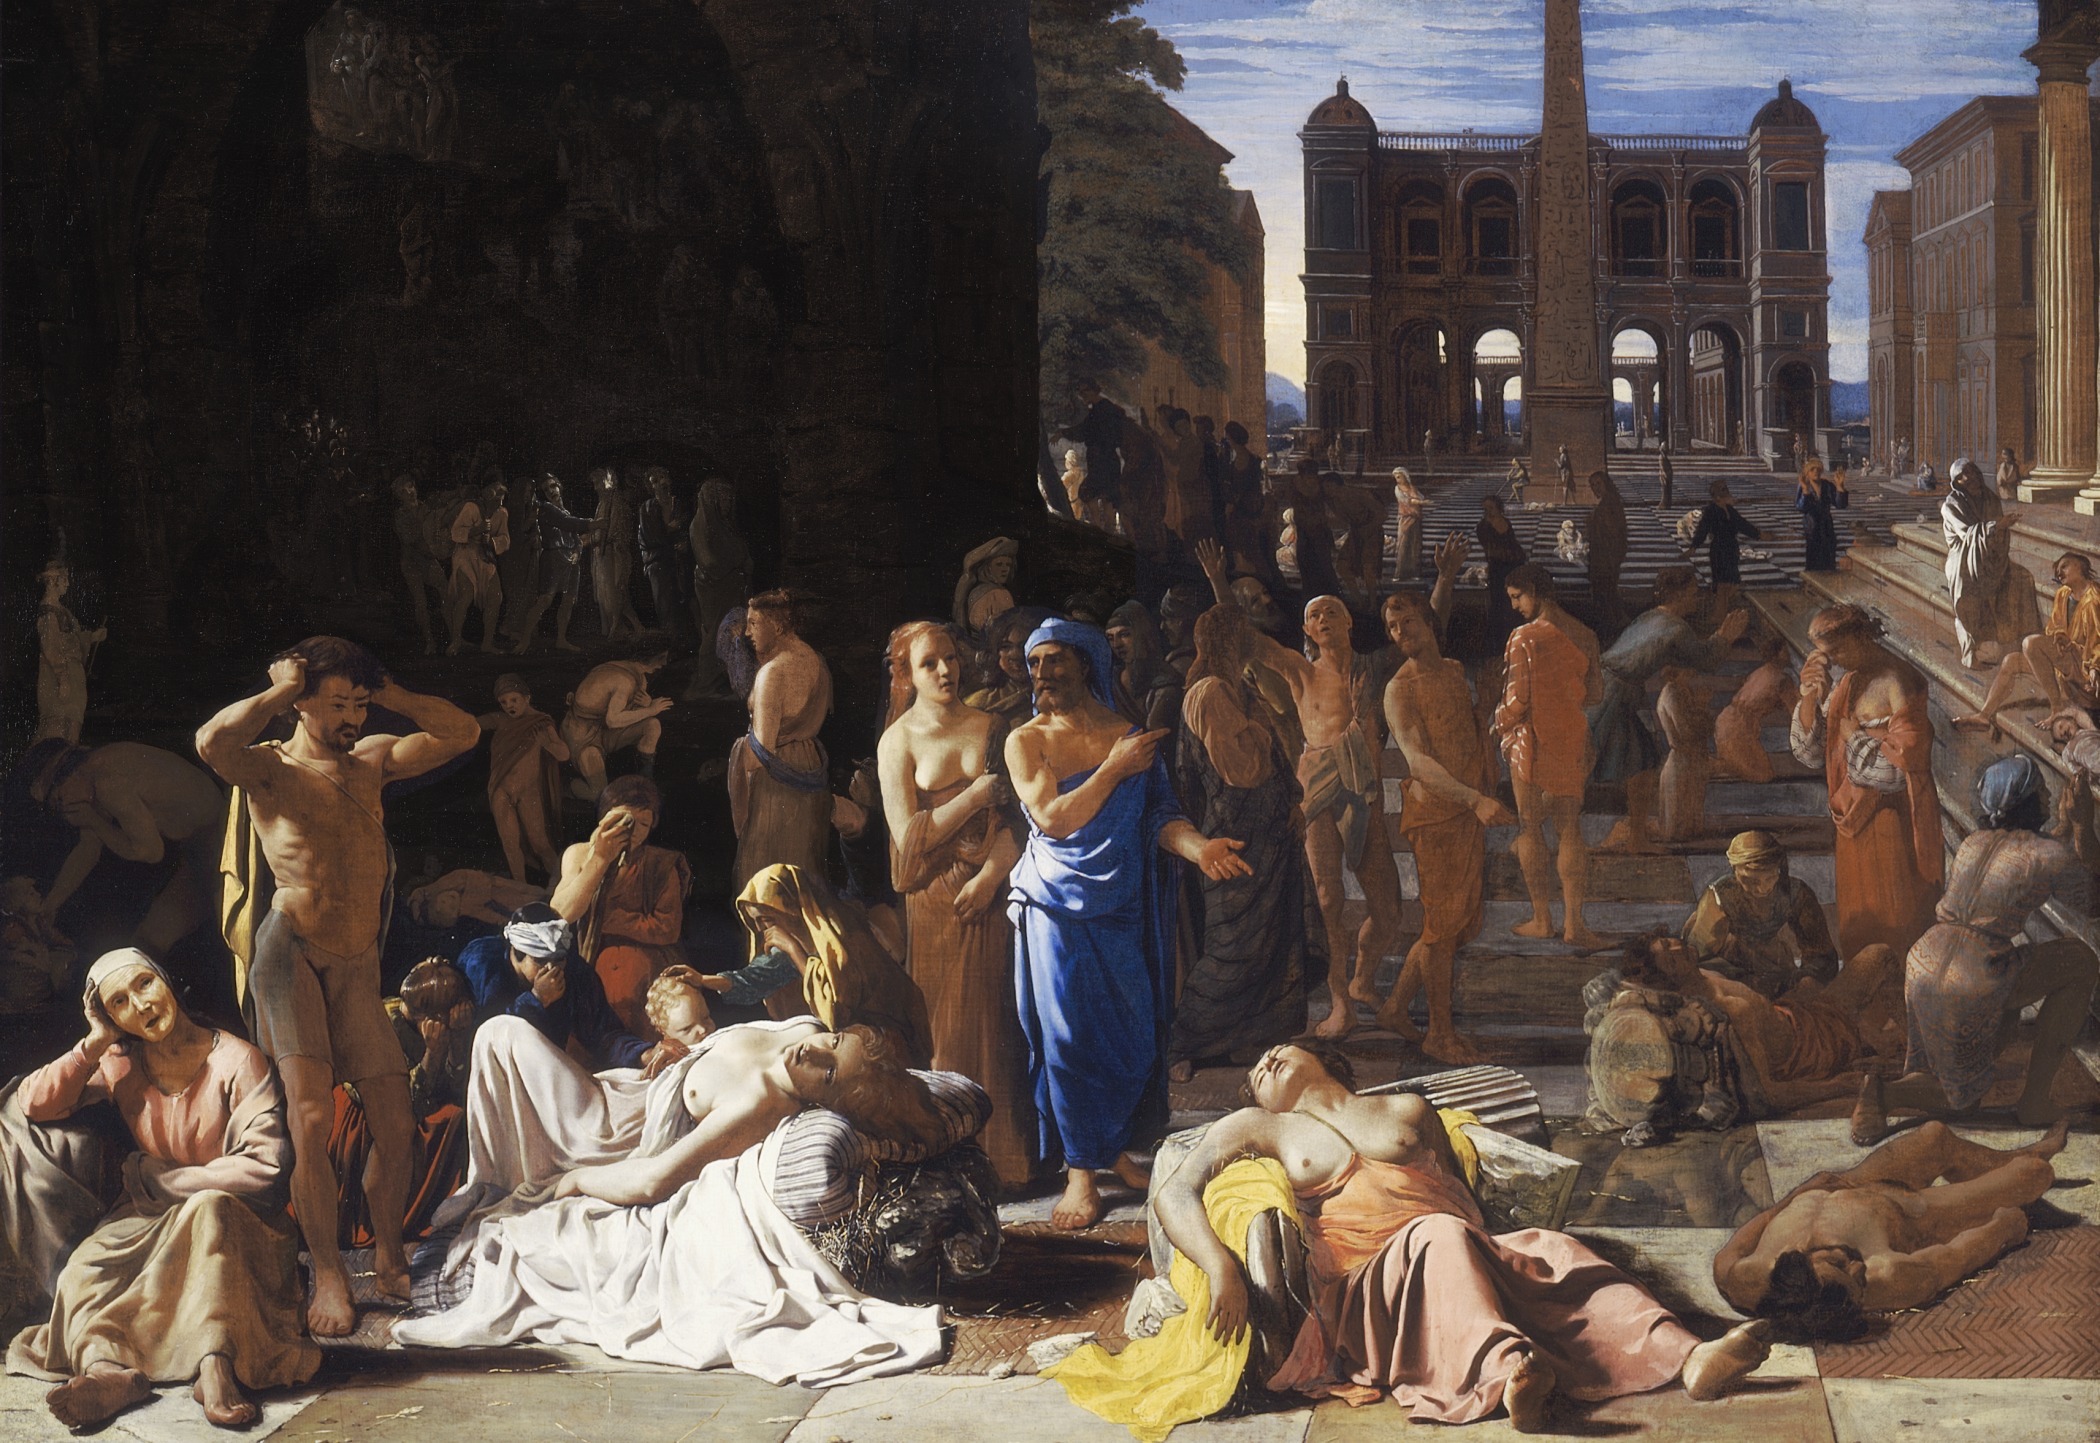 A painting of a plague-ridden ancient city, often thought to represent the plague of Athens in 430BC. The painting show people gathered in a town square, some dying and dead on the ground, while others look distressed or care for the ill.